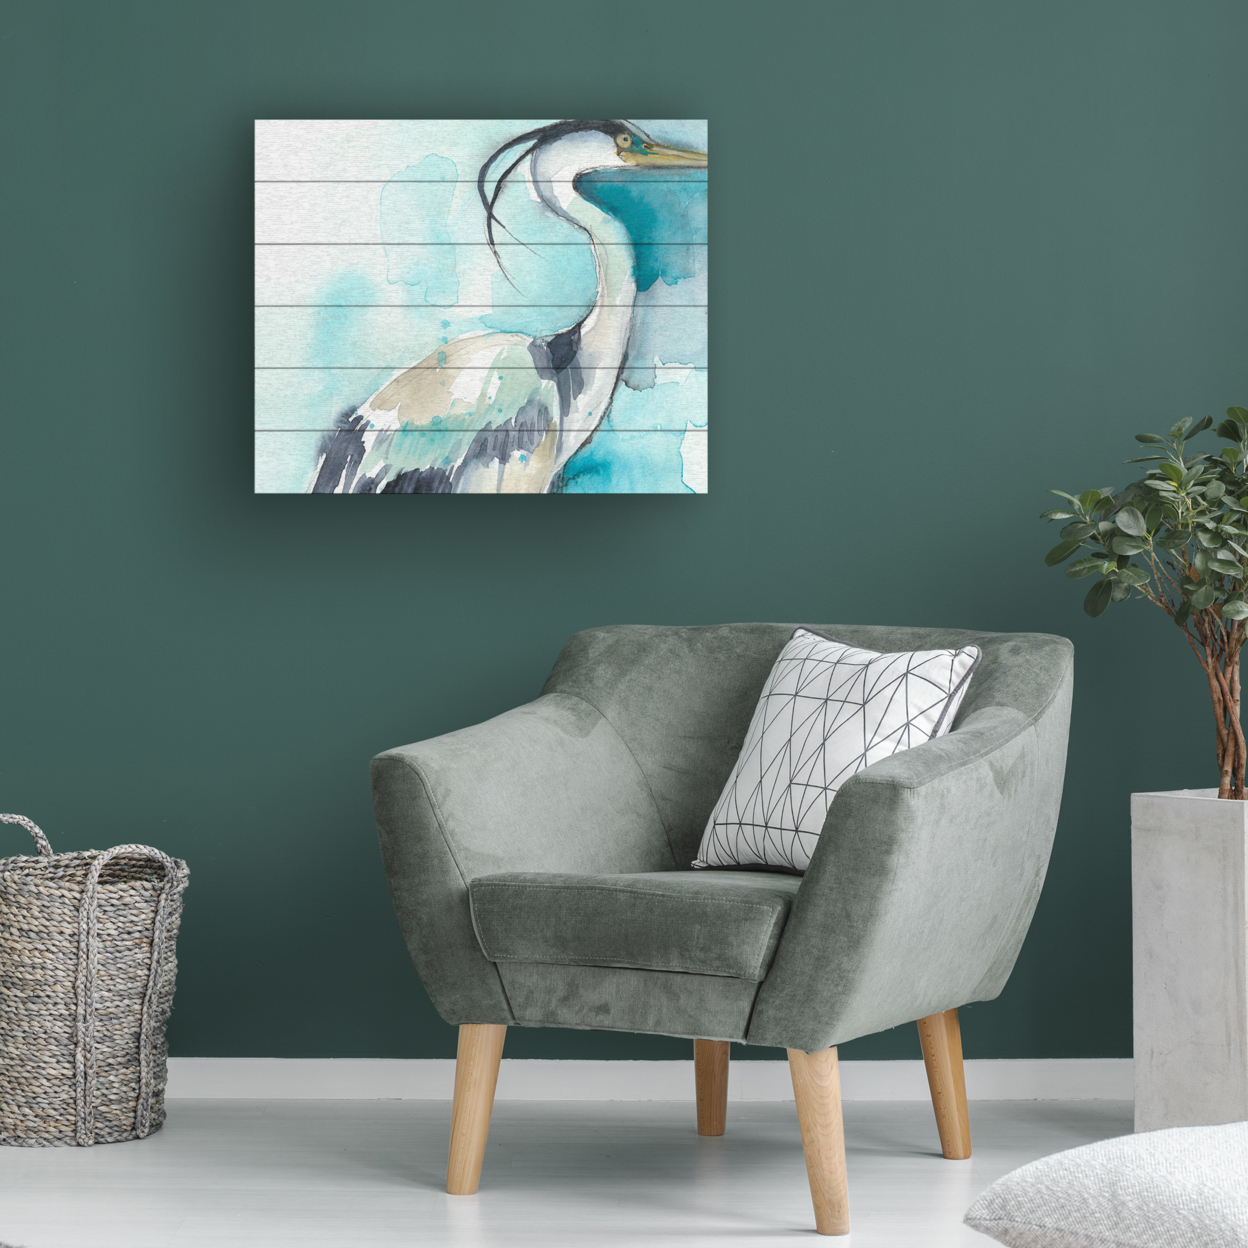 Wooden Slat Art 18 X 22 Inches Titled Heron Splash I Ready To Hang Home Decor Picture